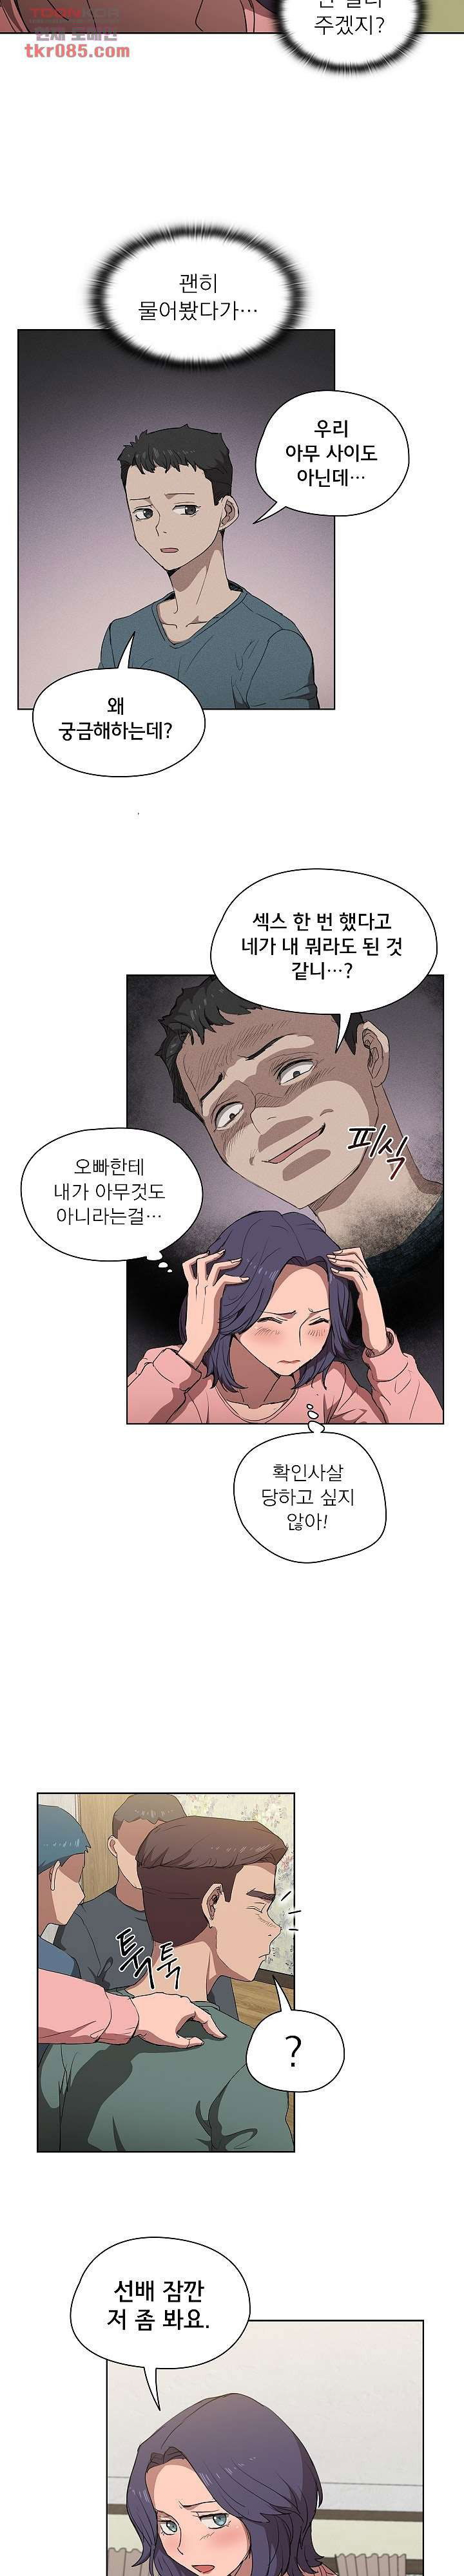 how-about-getting-lost-raw-chap-34-1